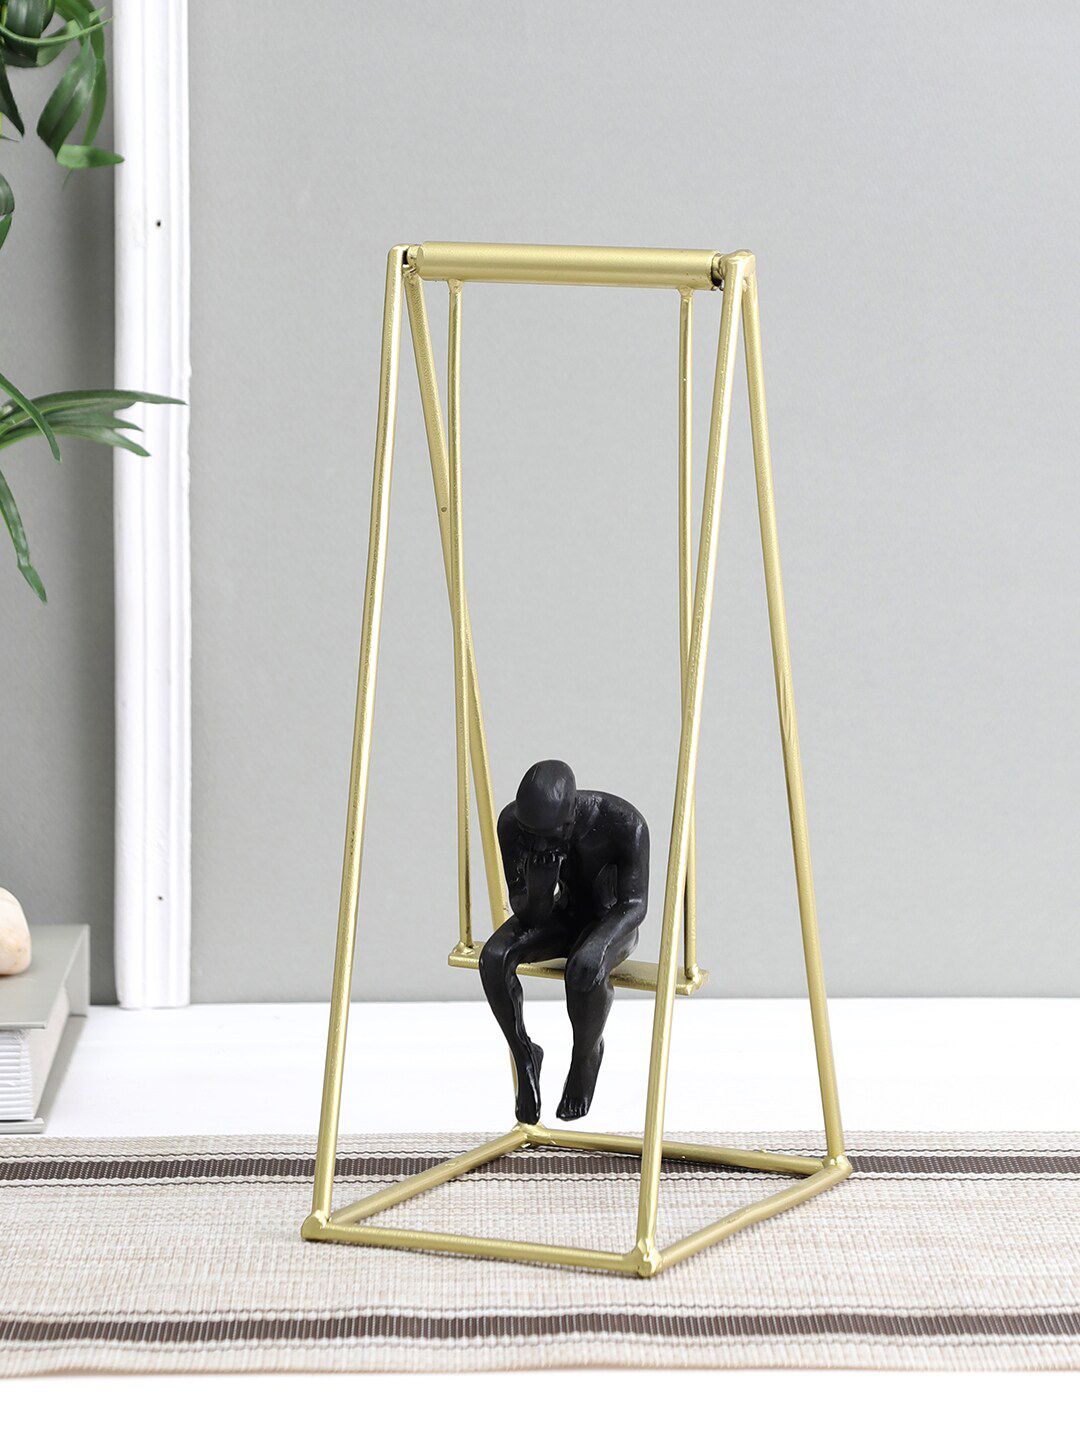 Aapno Rajasthan Gold-Toned & Black Man On Swing Showpiece Price in India